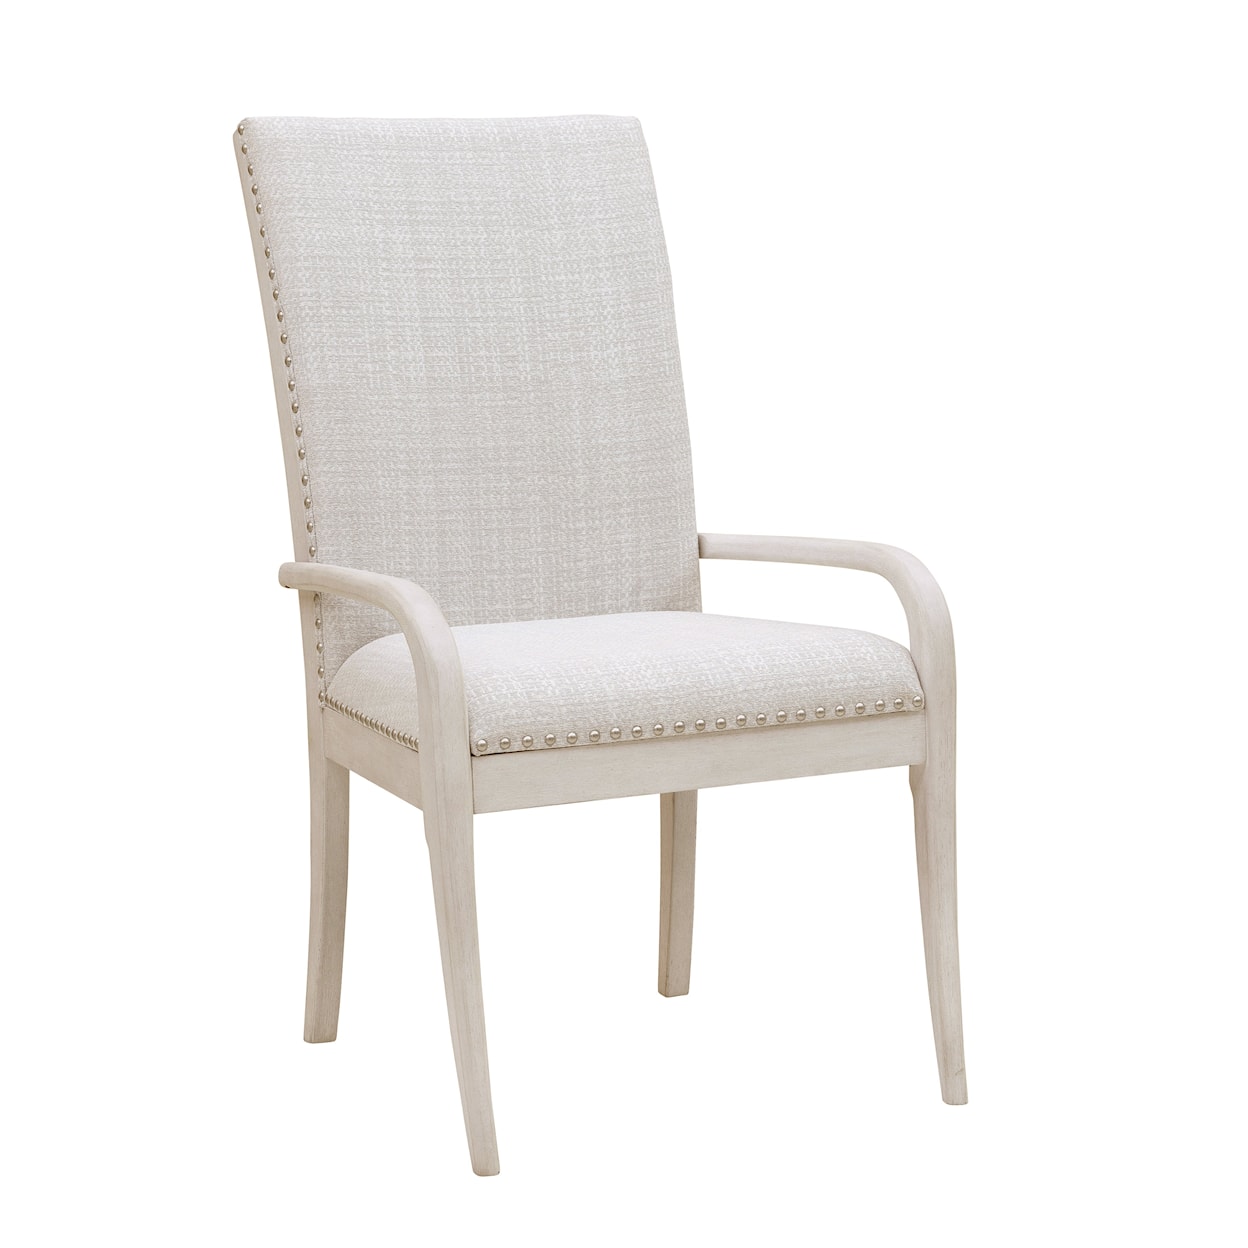 Pulaski Furniture Ashby Place Upholstered Dining Arm Chair